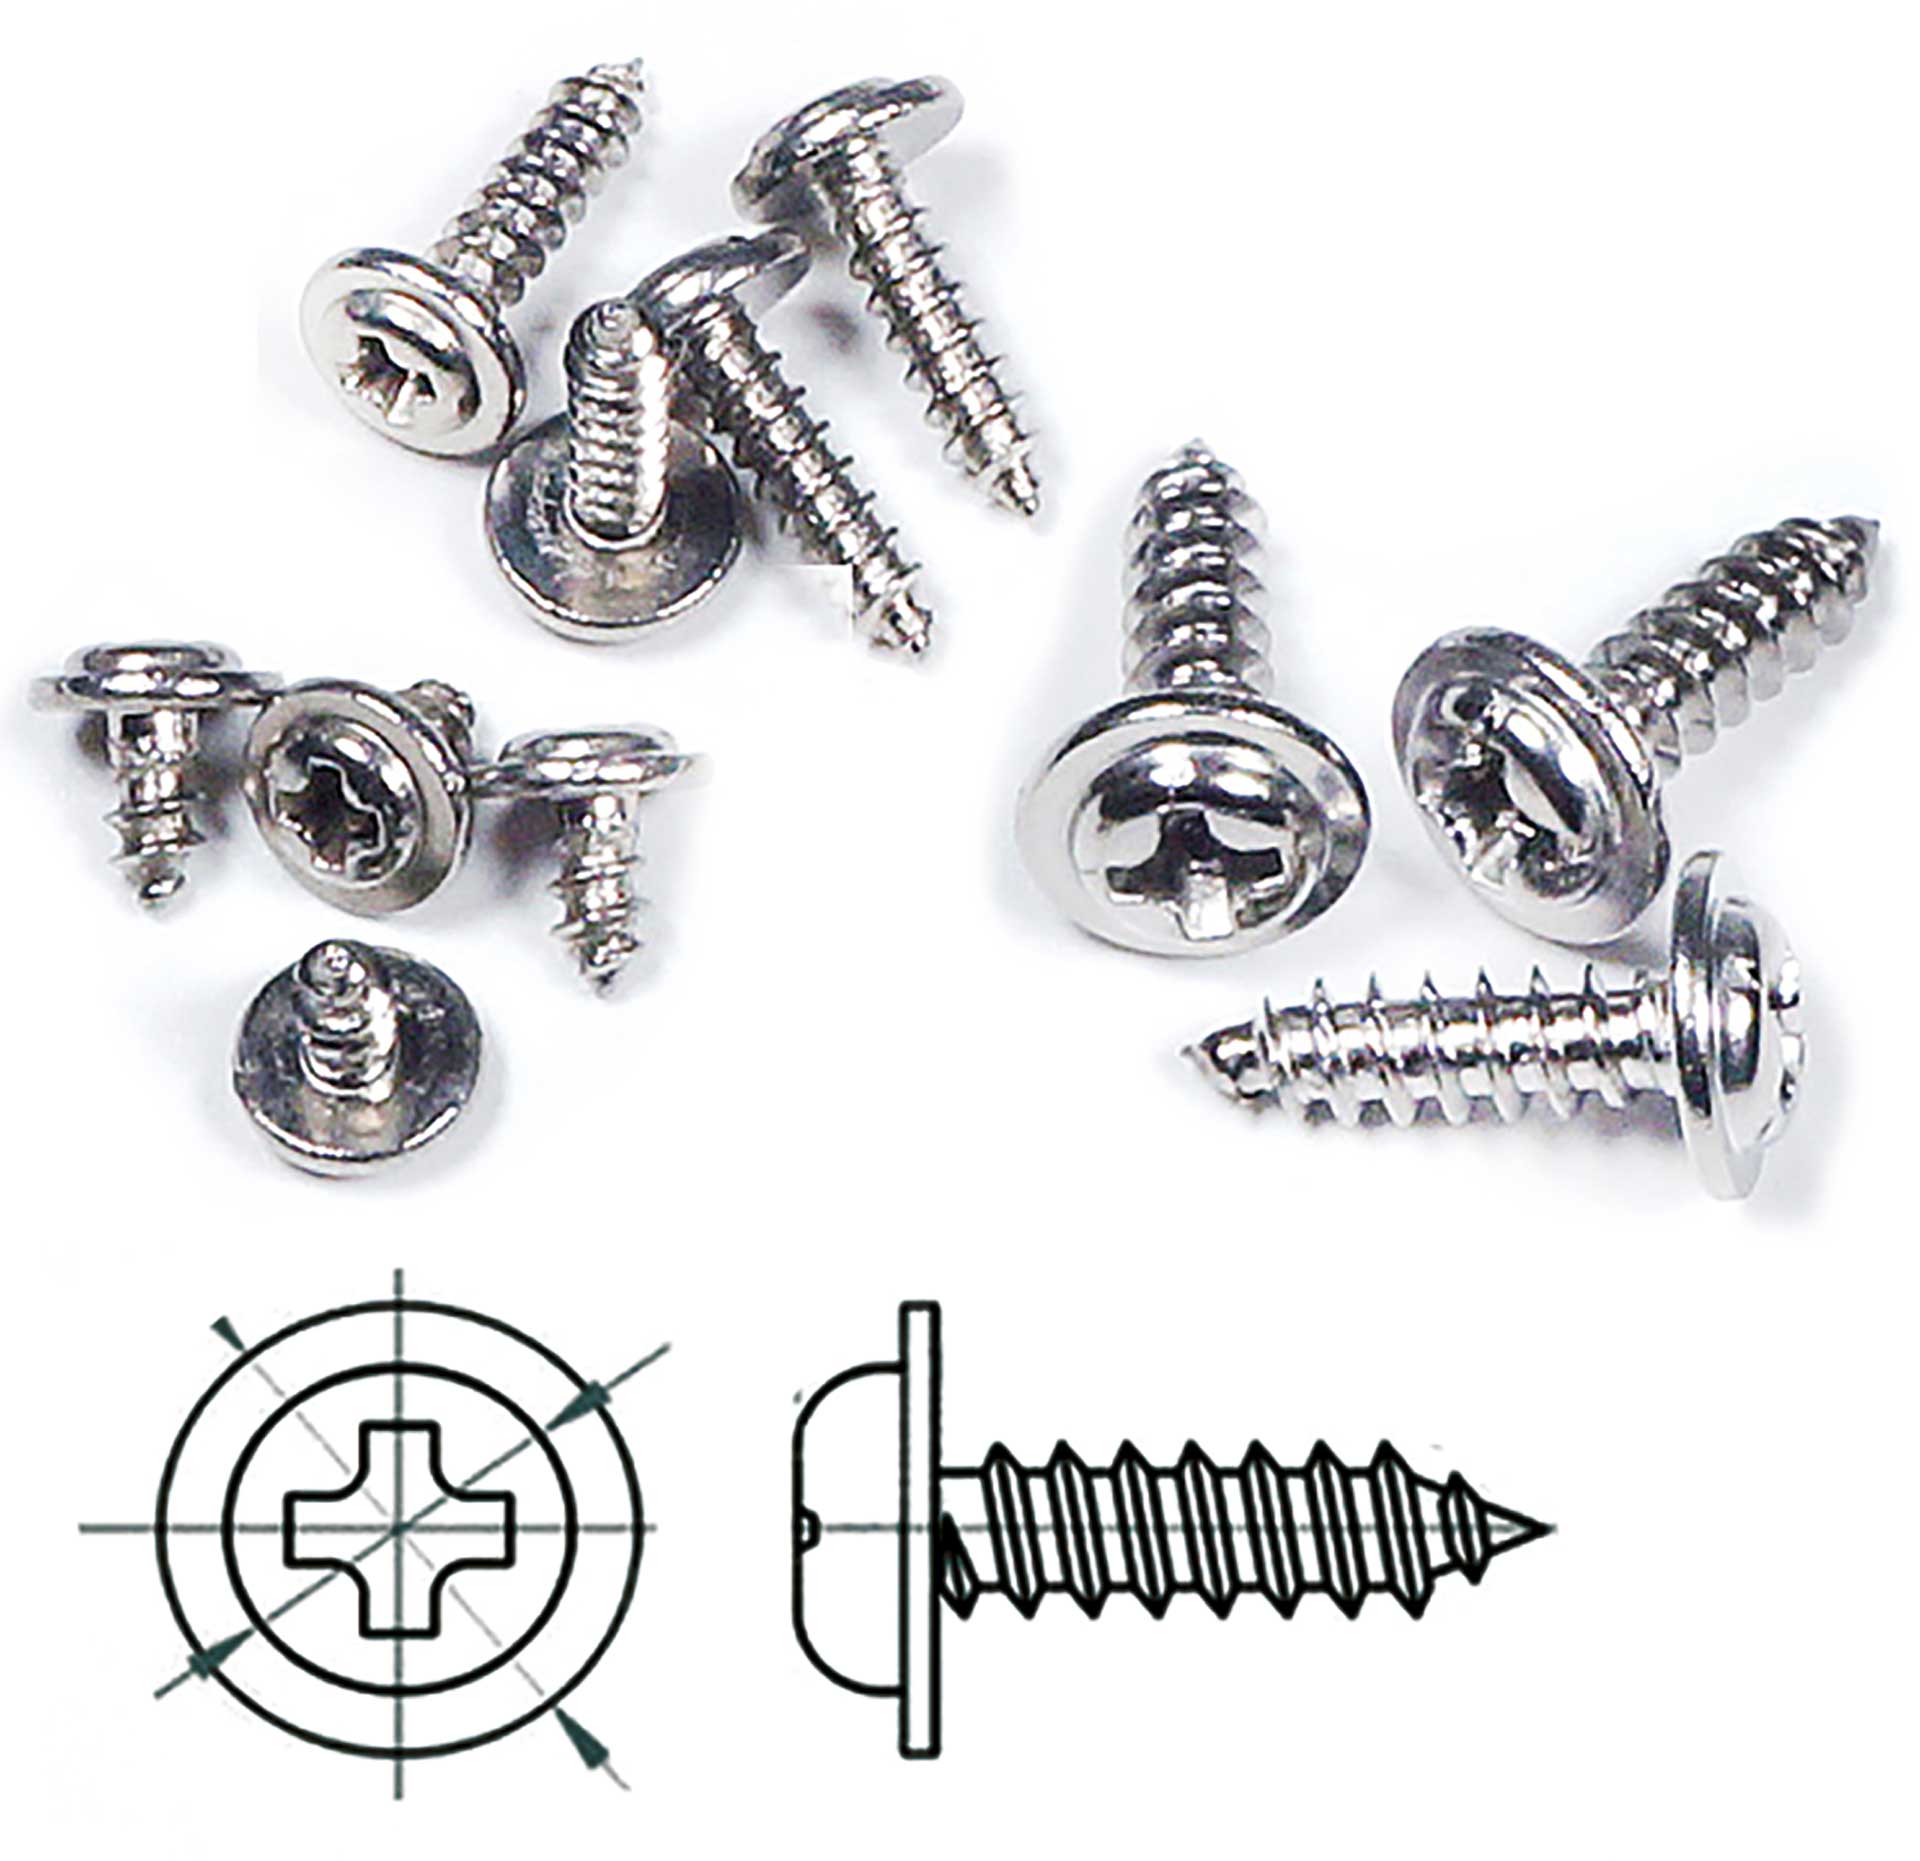 Robbe Modellsport Self-tapping screws with collar Phillips 2,6x8mm 30pcs. stainless steel